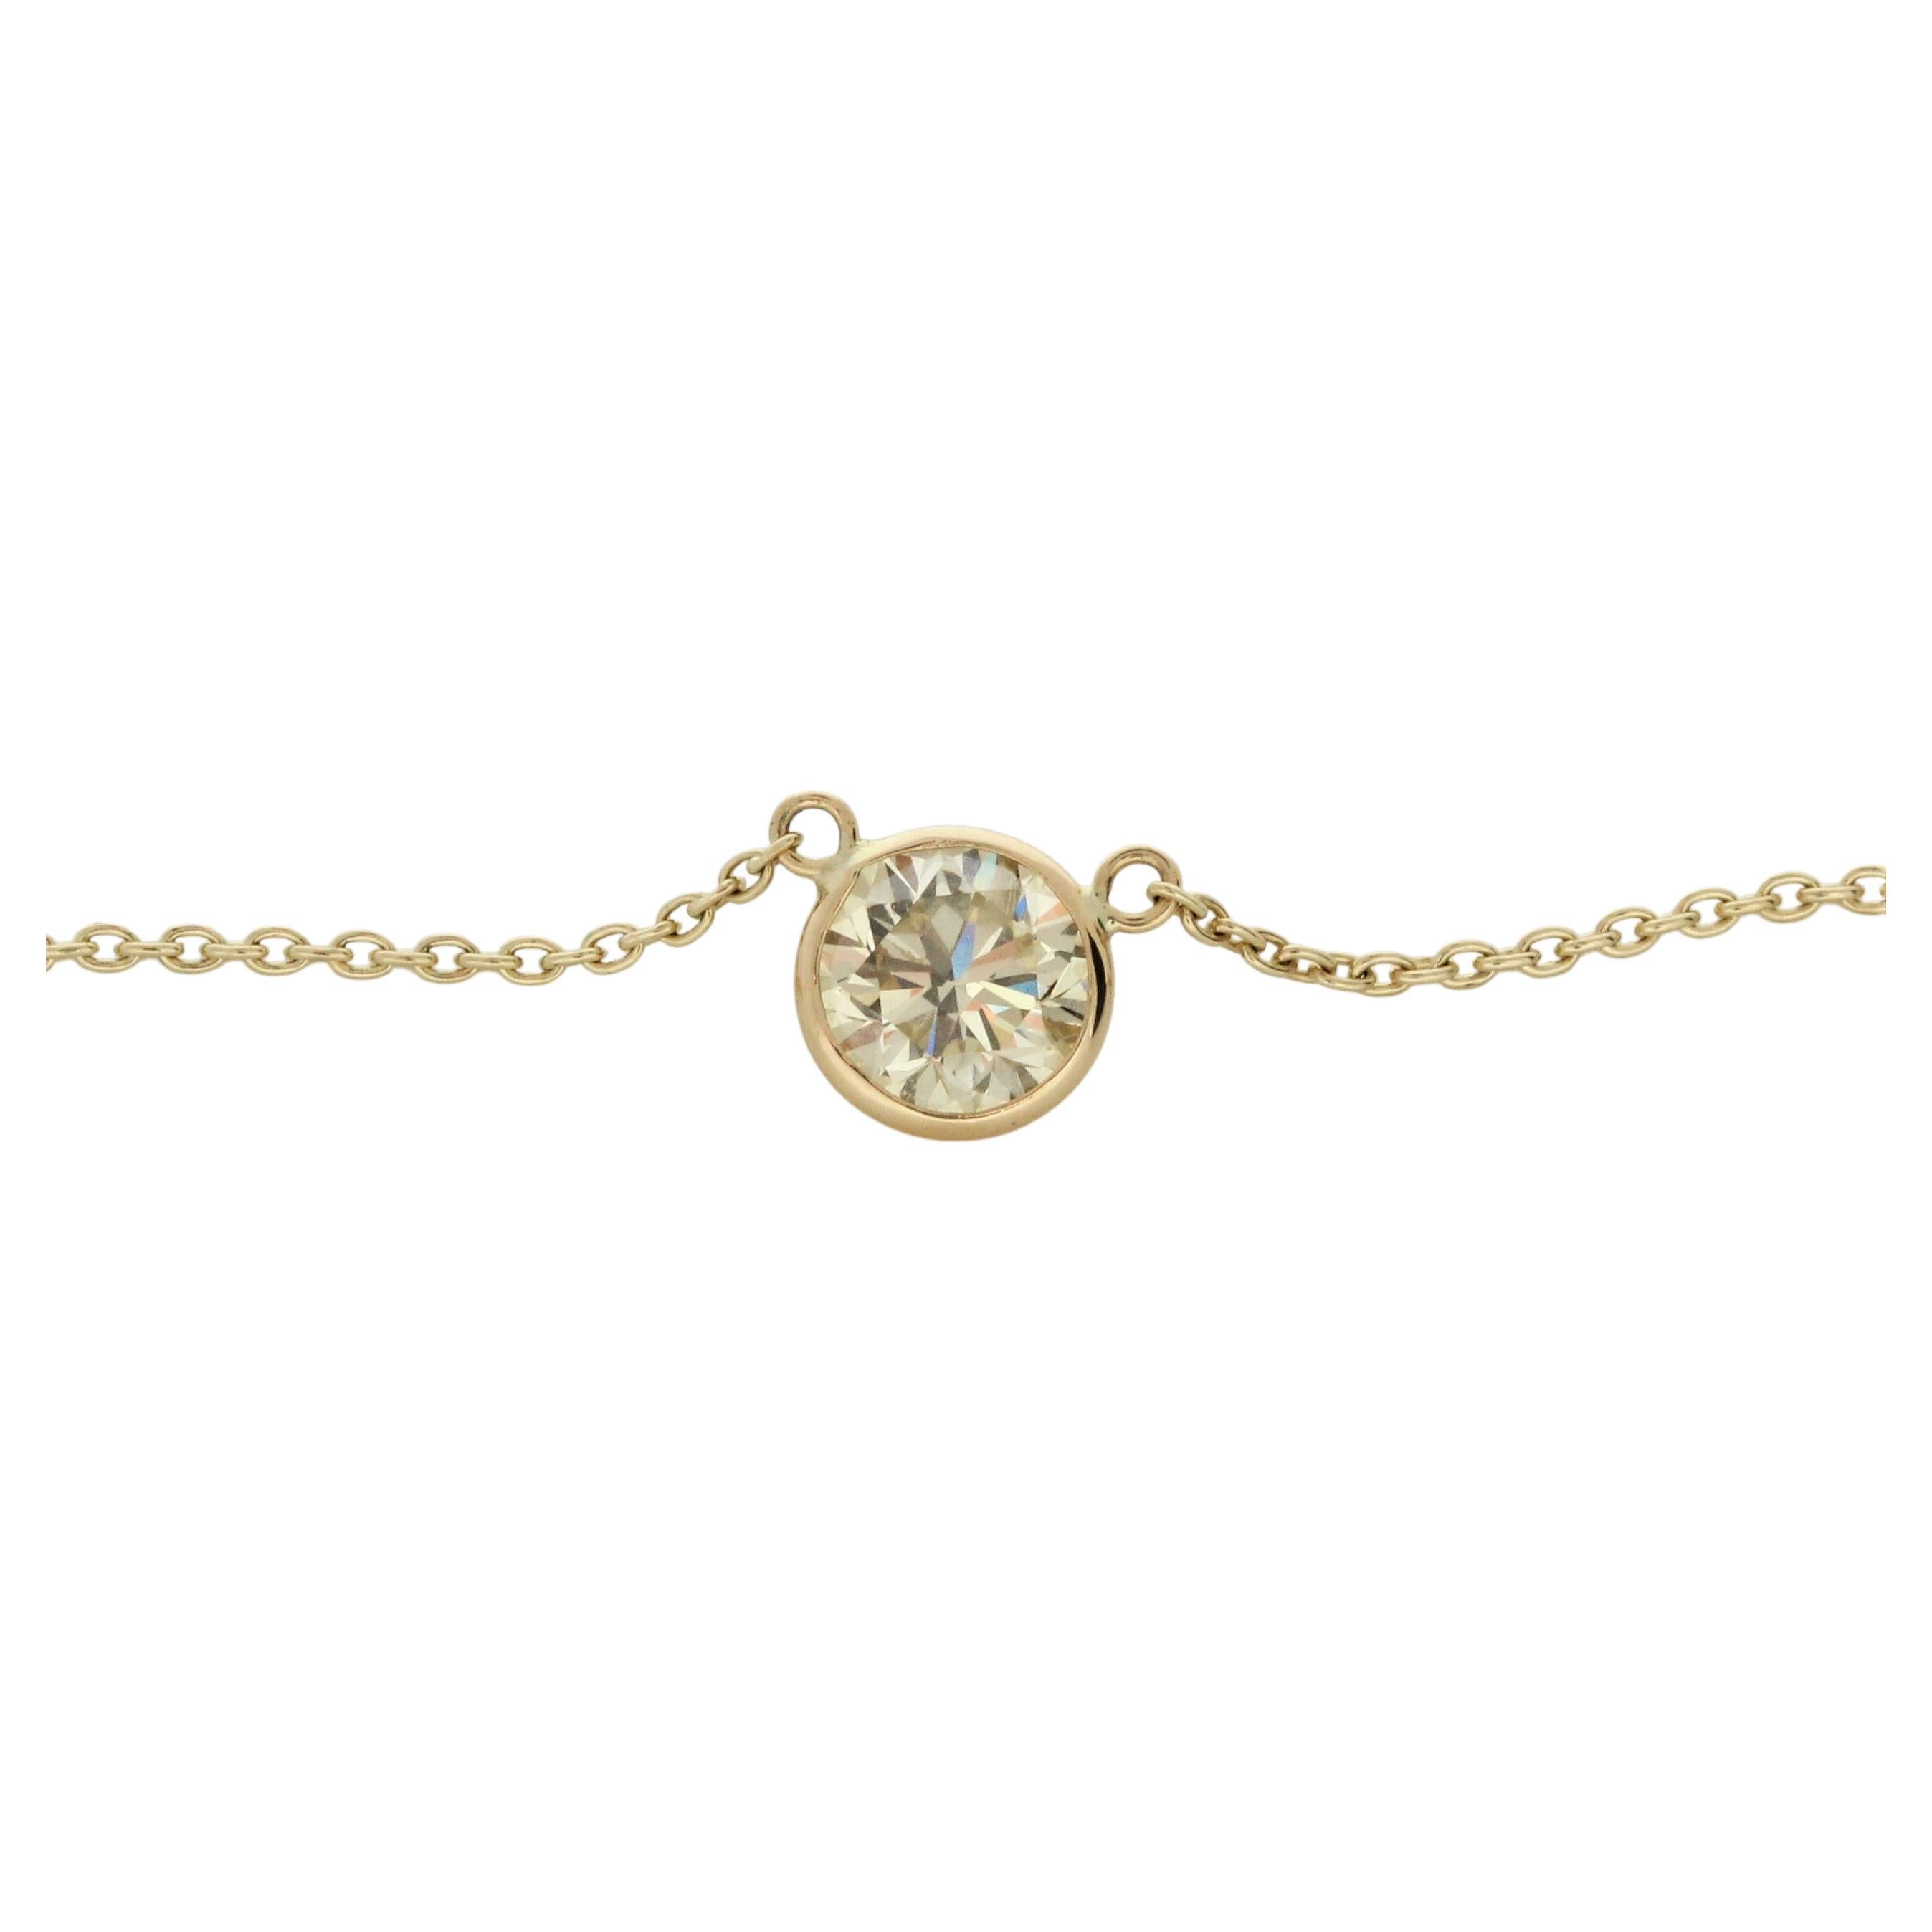 1.06 Carat Round Diamond Handmade Solitaire Necklace In 14k Yellow Gold